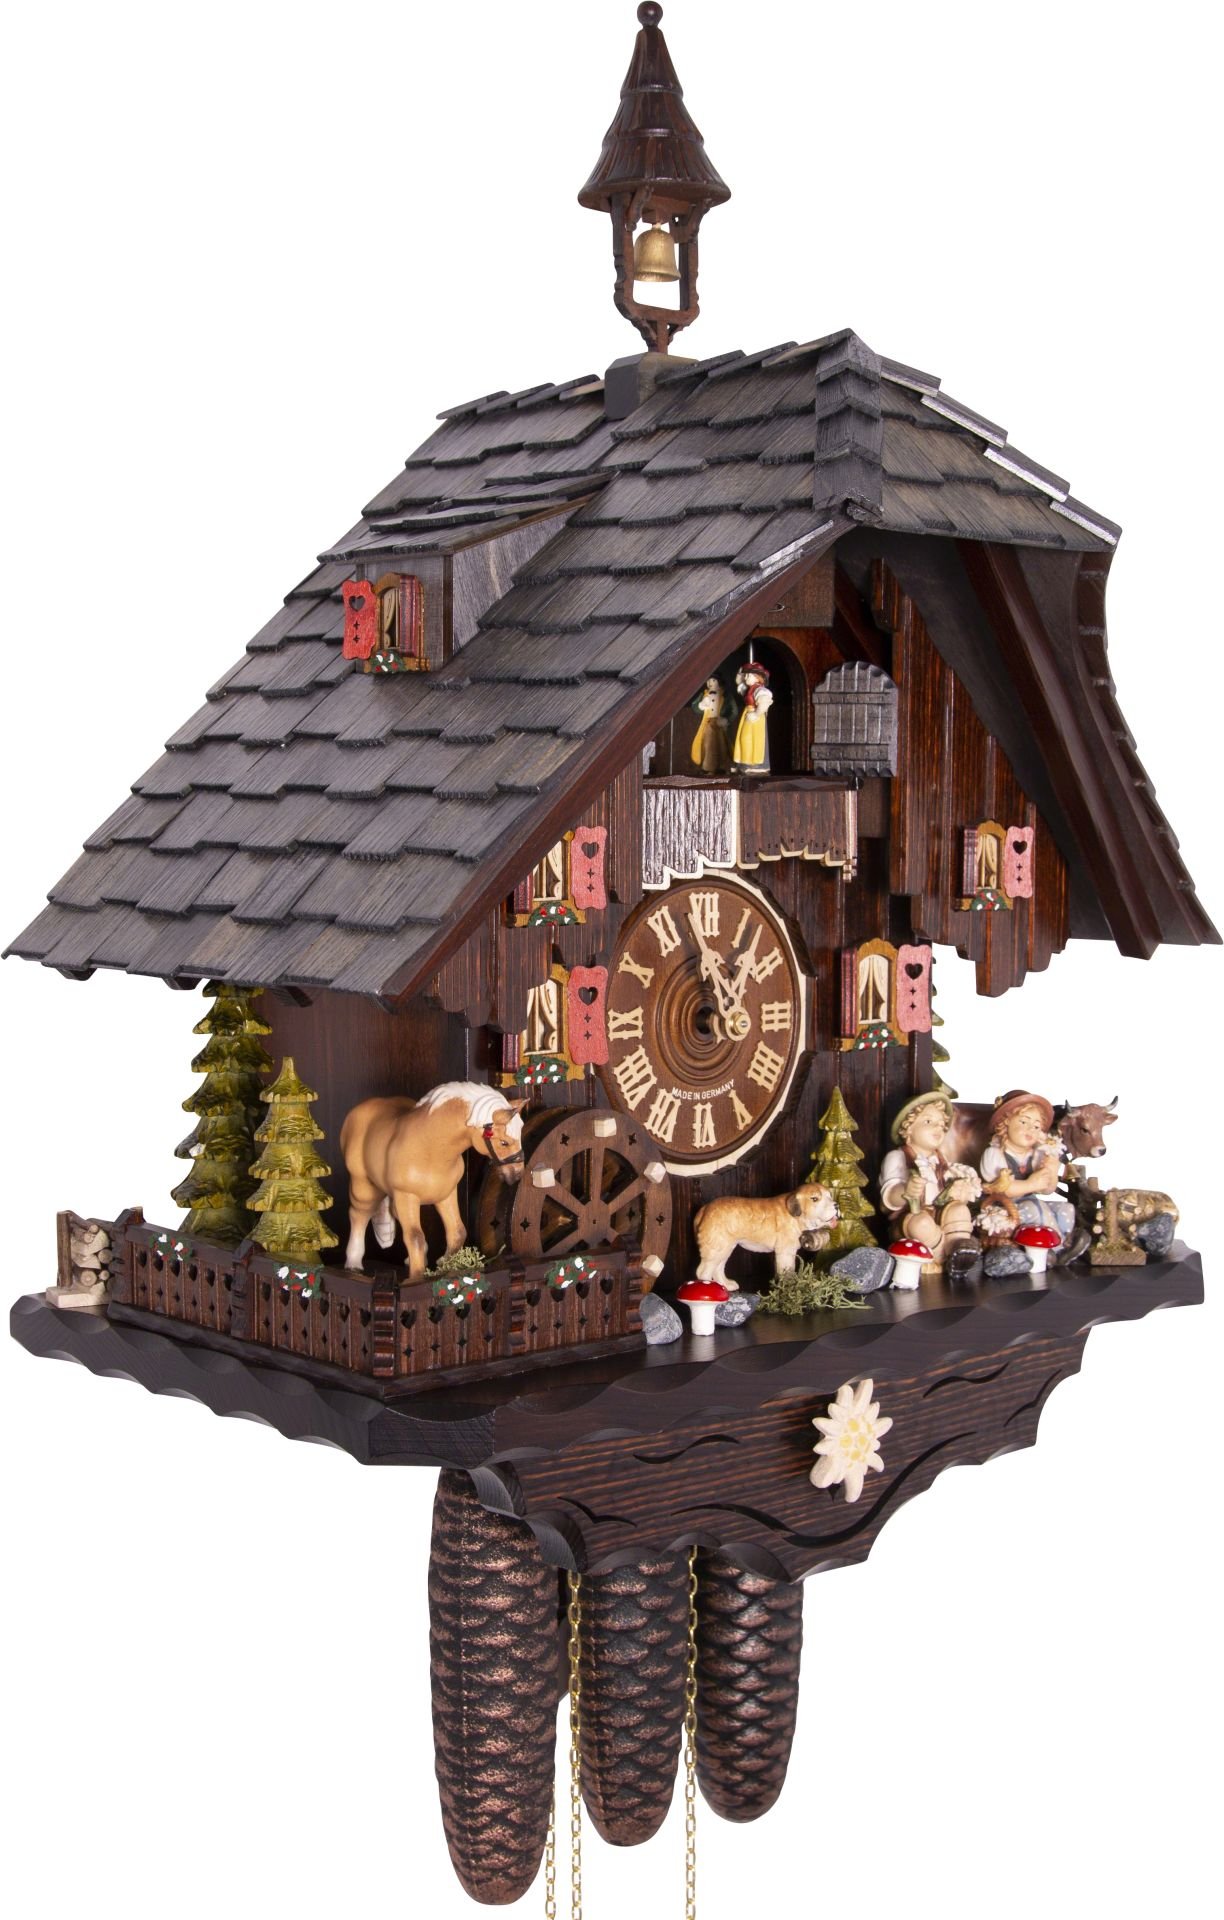 Cuckoo Clock Chalet Style 8 Day Movement 55cm by Hekas